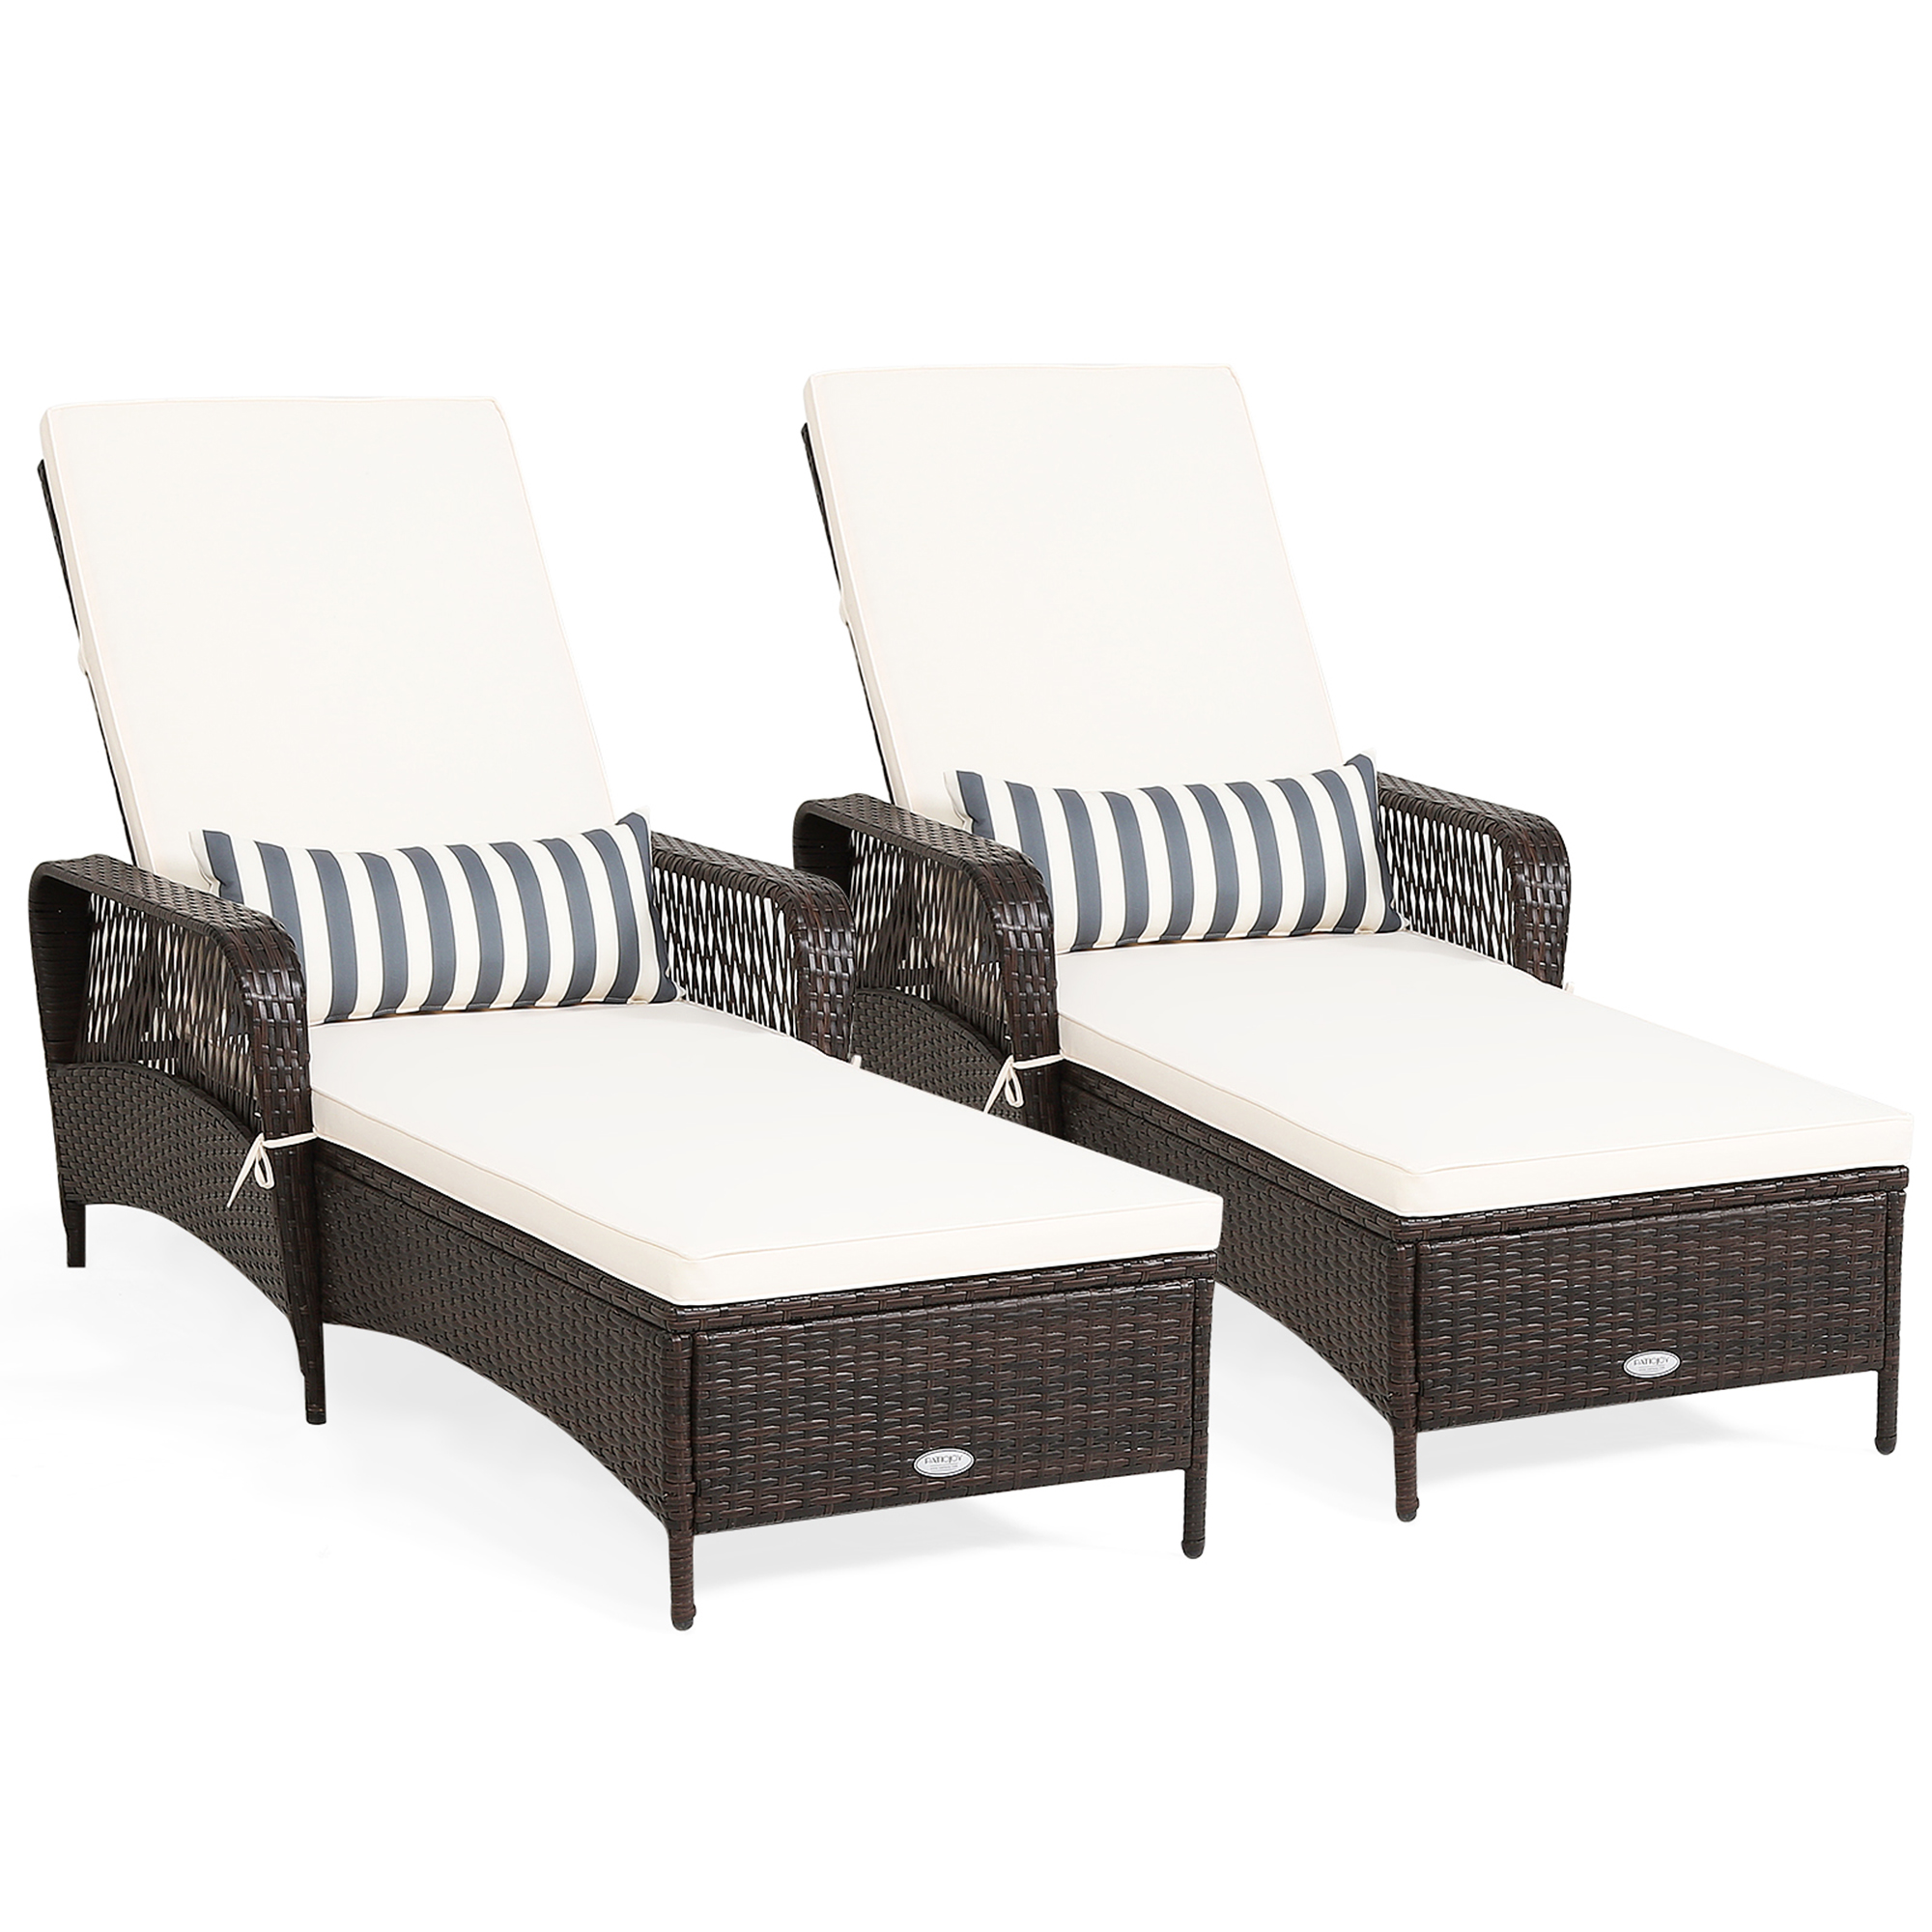 Gymax Set of 2 Rattan Patio Lounge Chair Chaise w/ Adjustable Backrest Cushion & Pillow - image 3 of 10